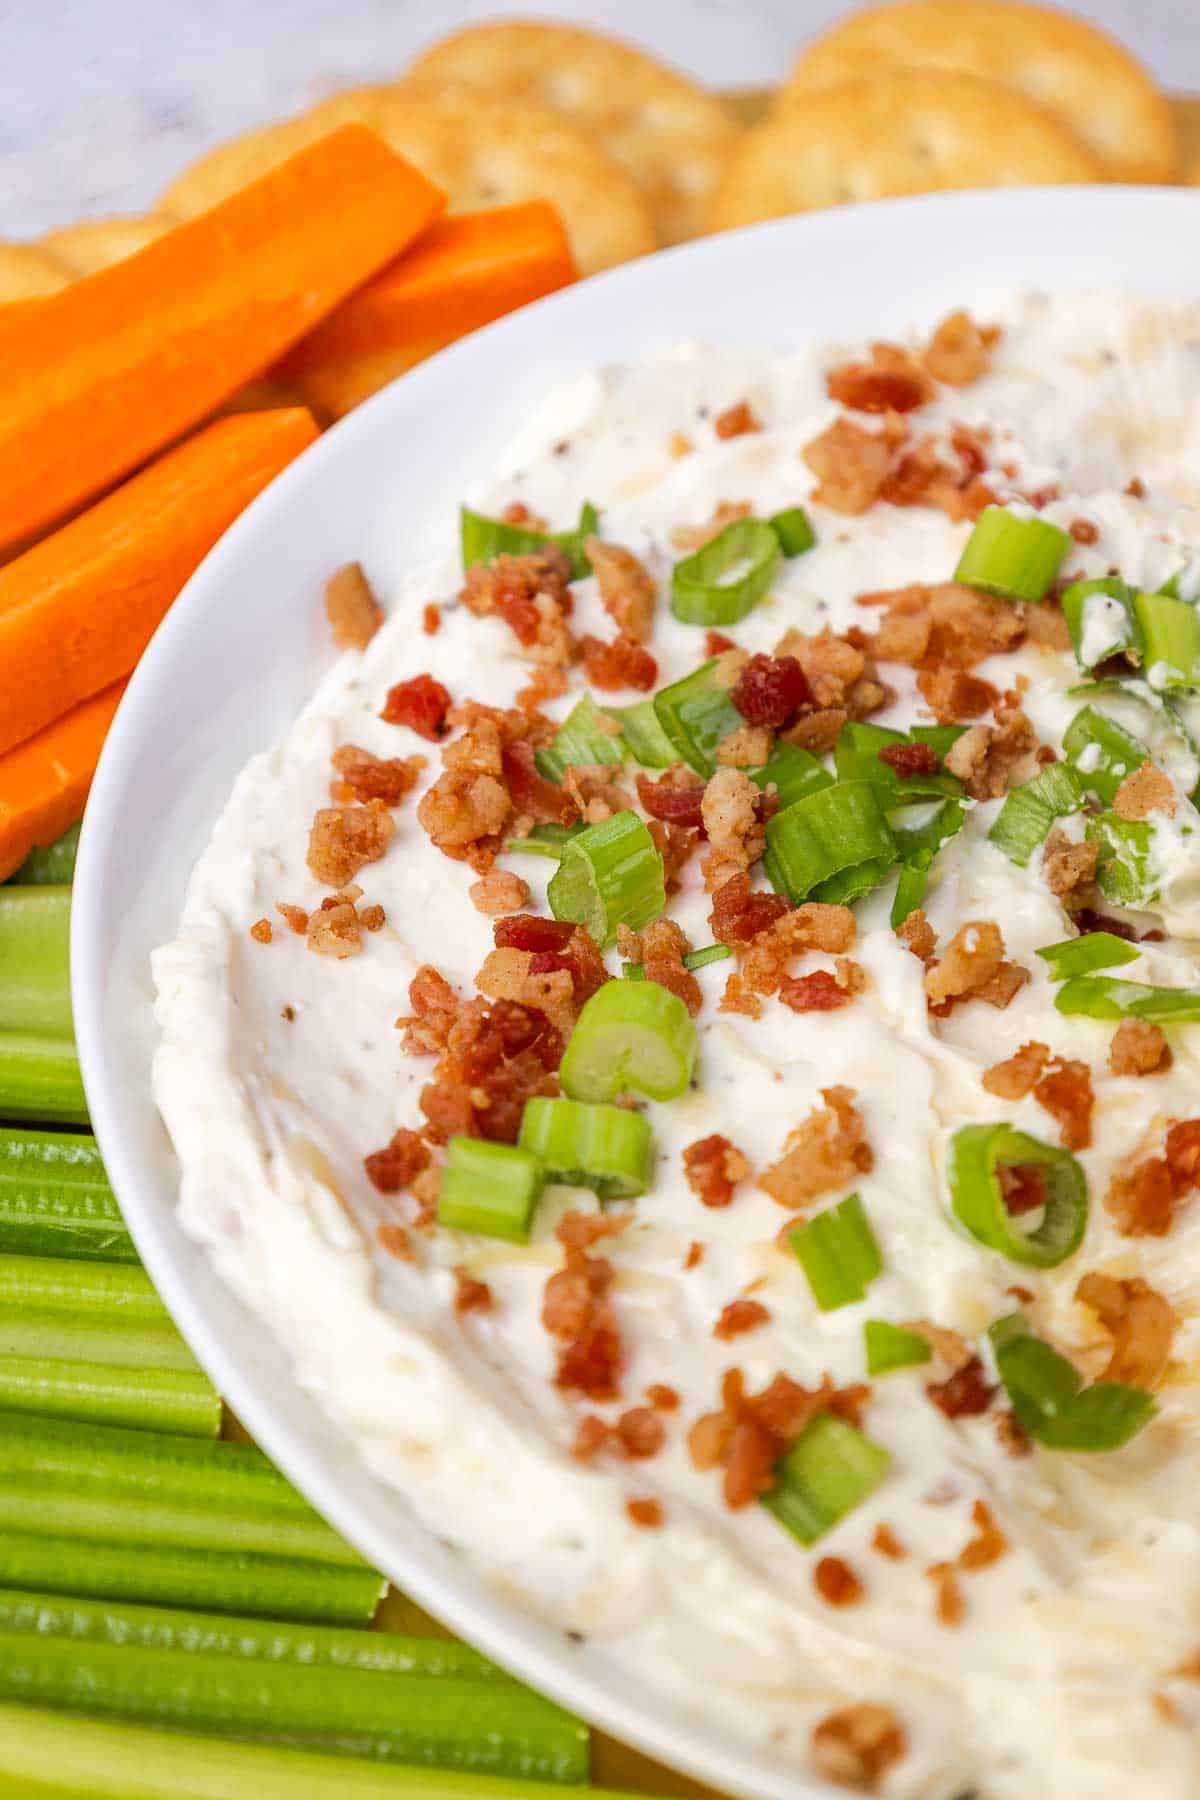 Gouda cheese dip topped with bacon bits and green onion.